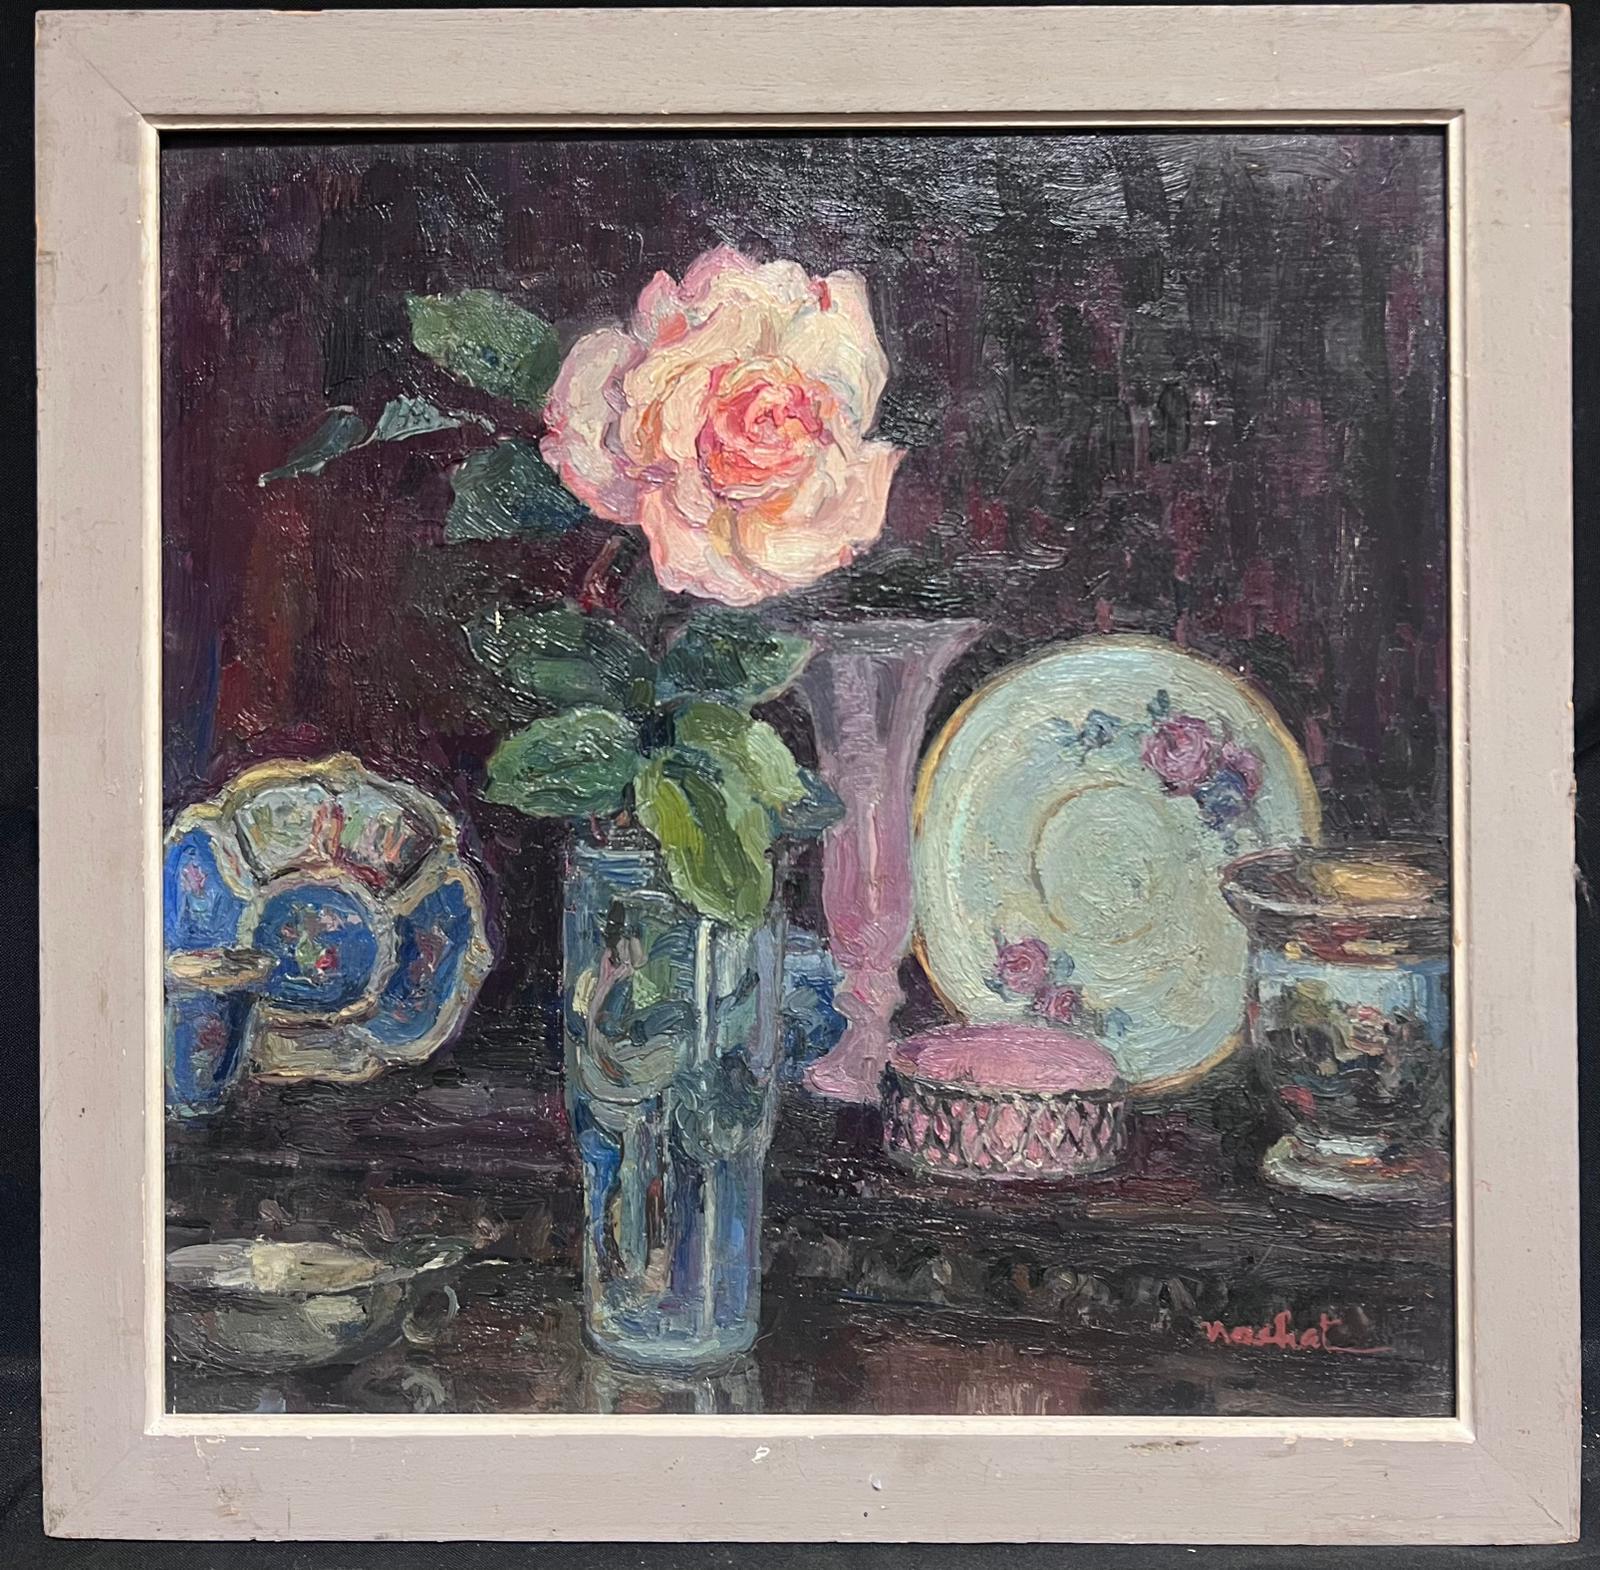 Pink Rose in Glass Vase
French Impressionist School, 20th century
signed to the lower front, inscribed verso
oil on board, framed
framed: 18 x 18
board: 16 x 16 inches
provenance: private collection, France
condition: very good and sound condition